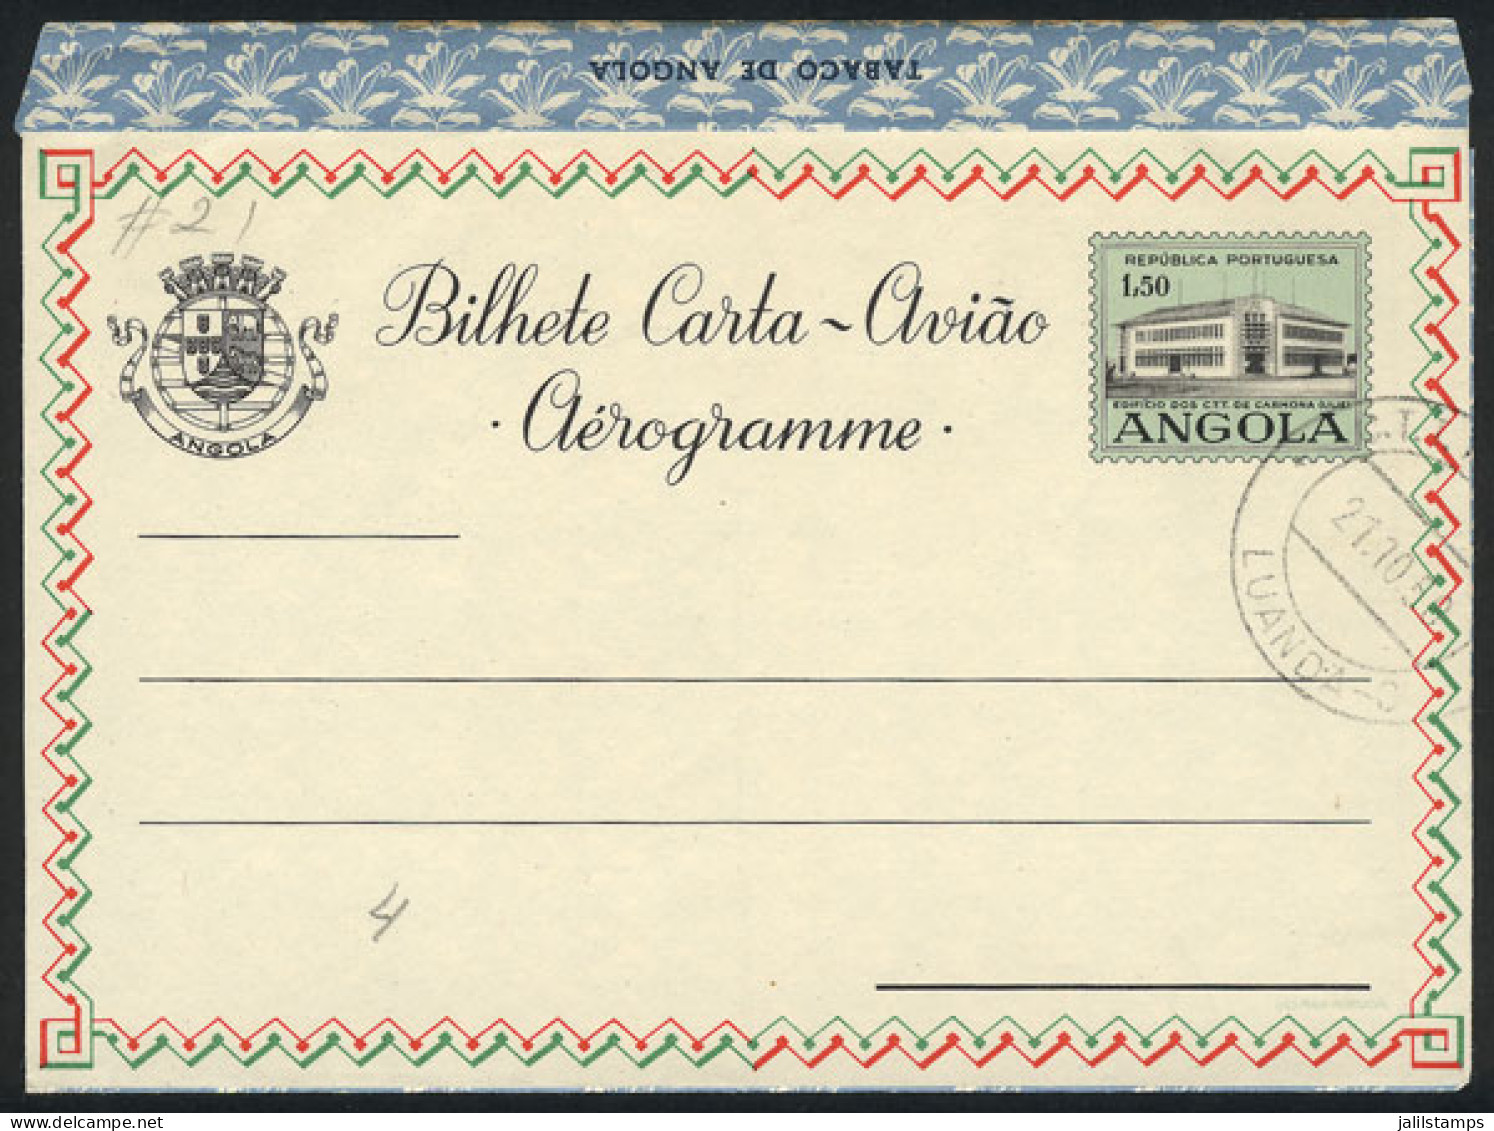 ANGOLA: 1.50Ag. Aerogram, Unused, Cancelled To Order, Excellent Quality! - Angola